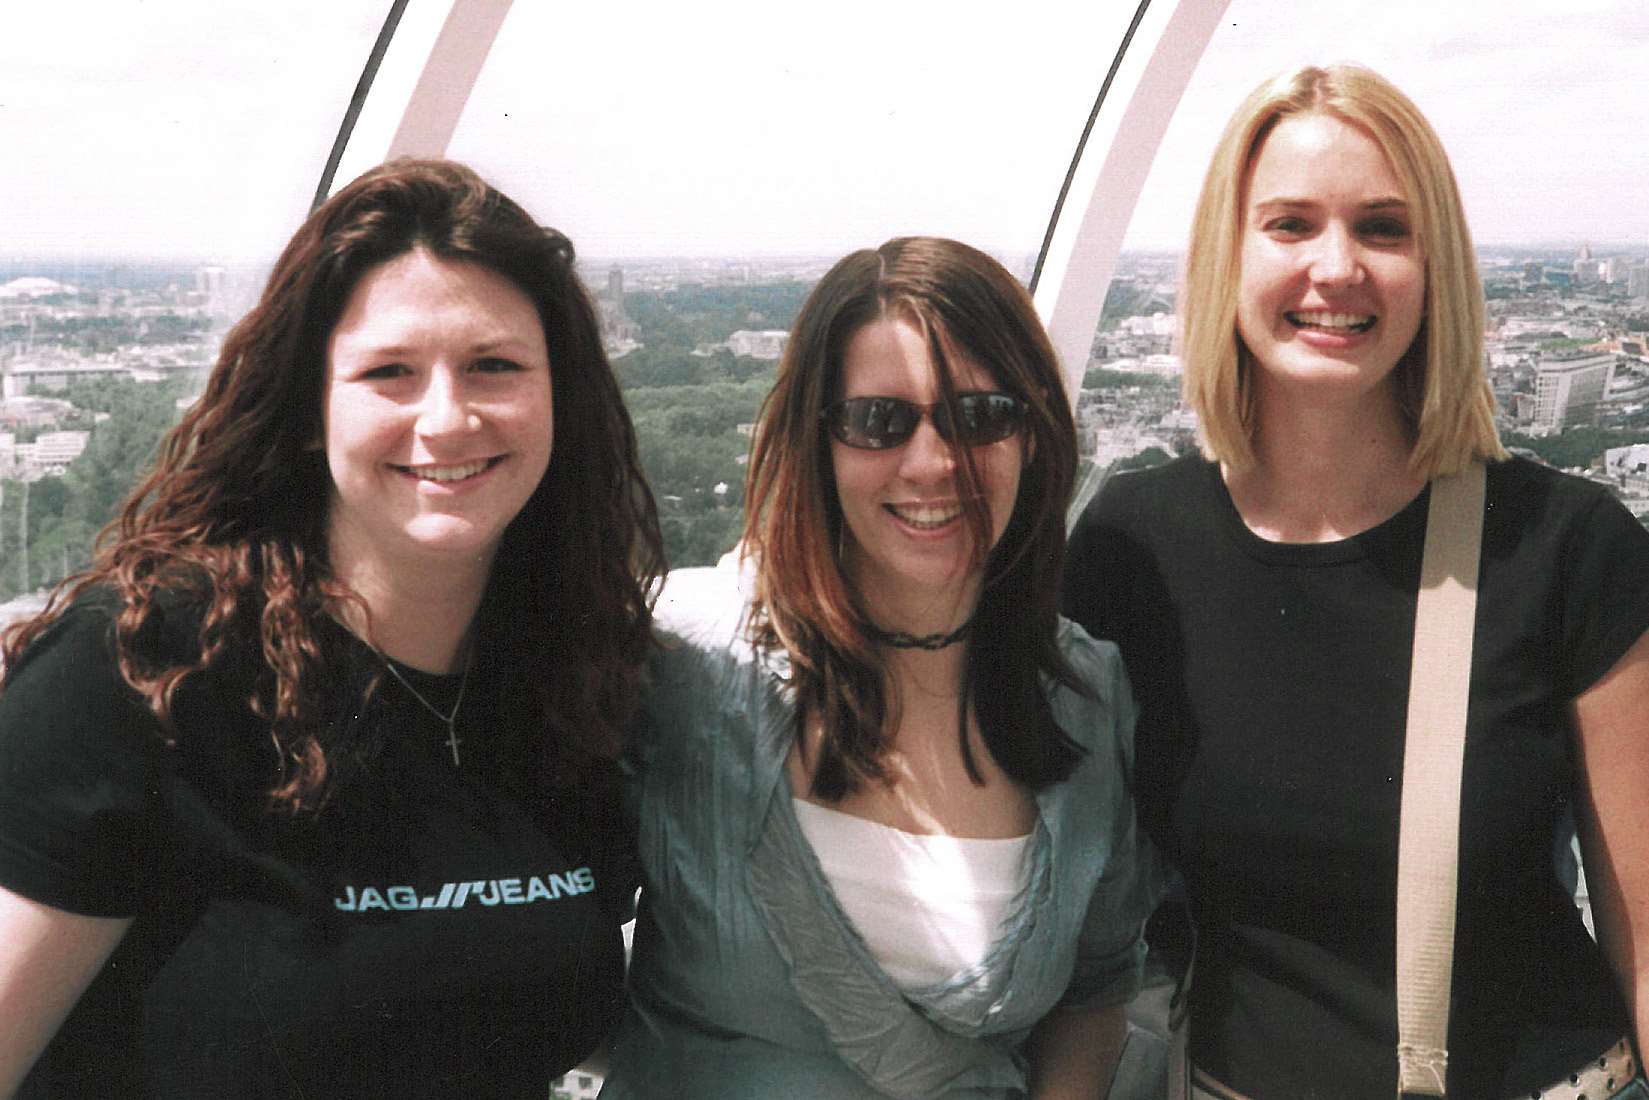 Jo with her friends Becca (middle) and Steph Kirk (right).